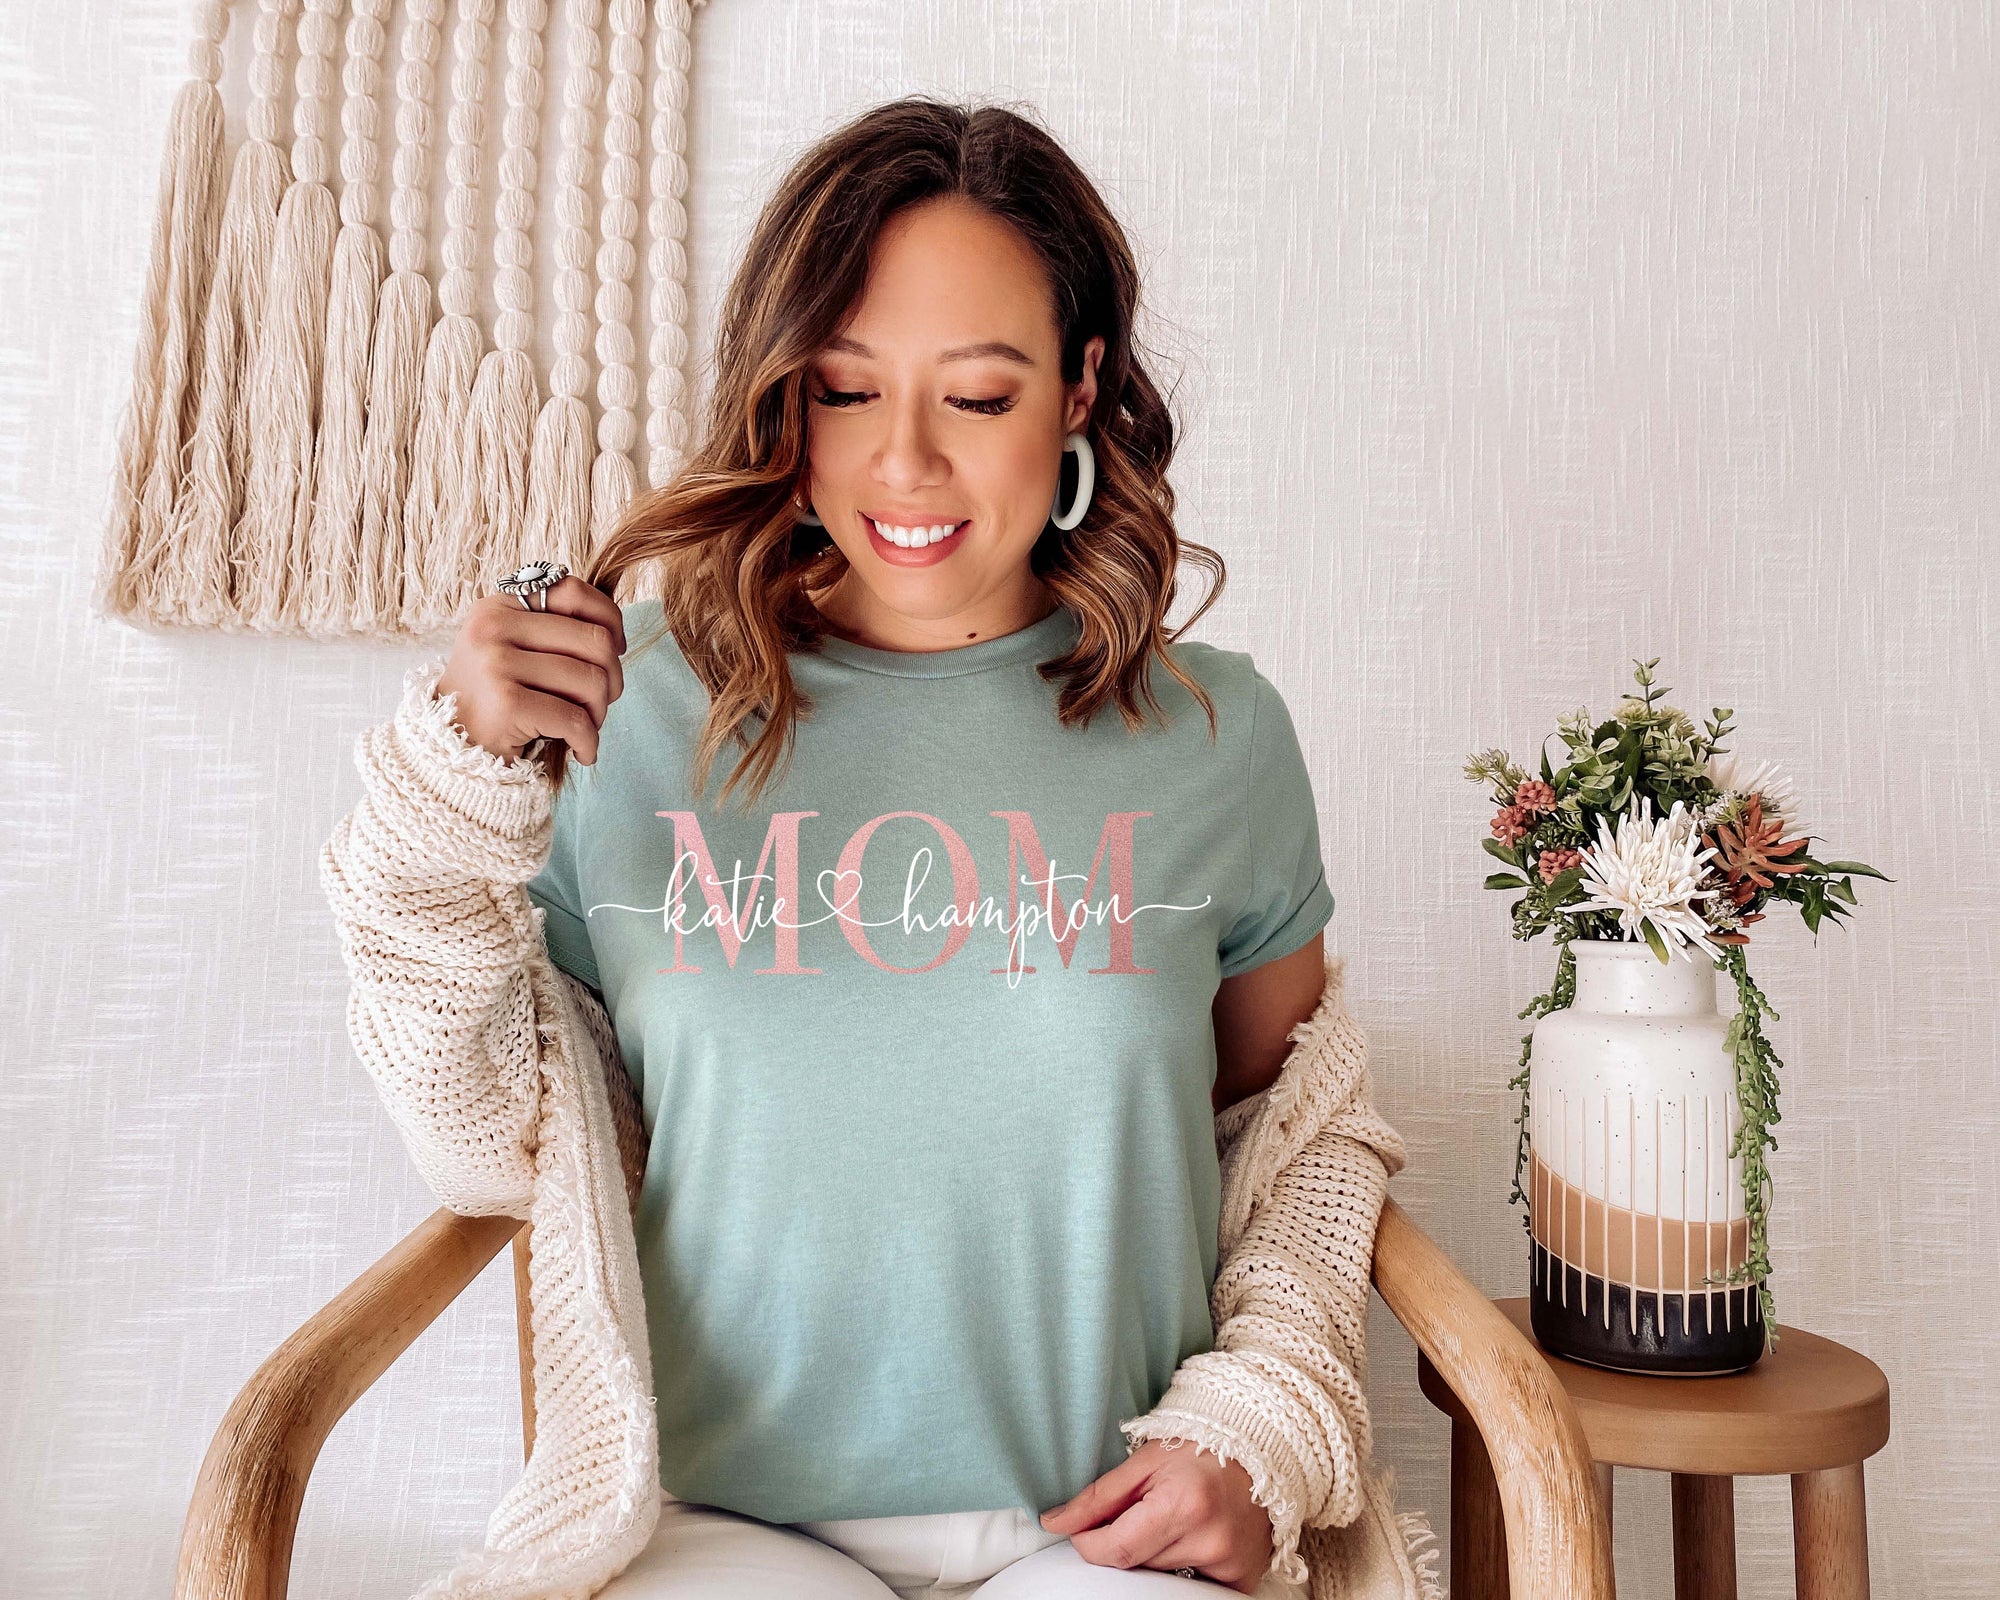 Personalized Mom Shirt - Women's Graphic Tee - Free Shipping